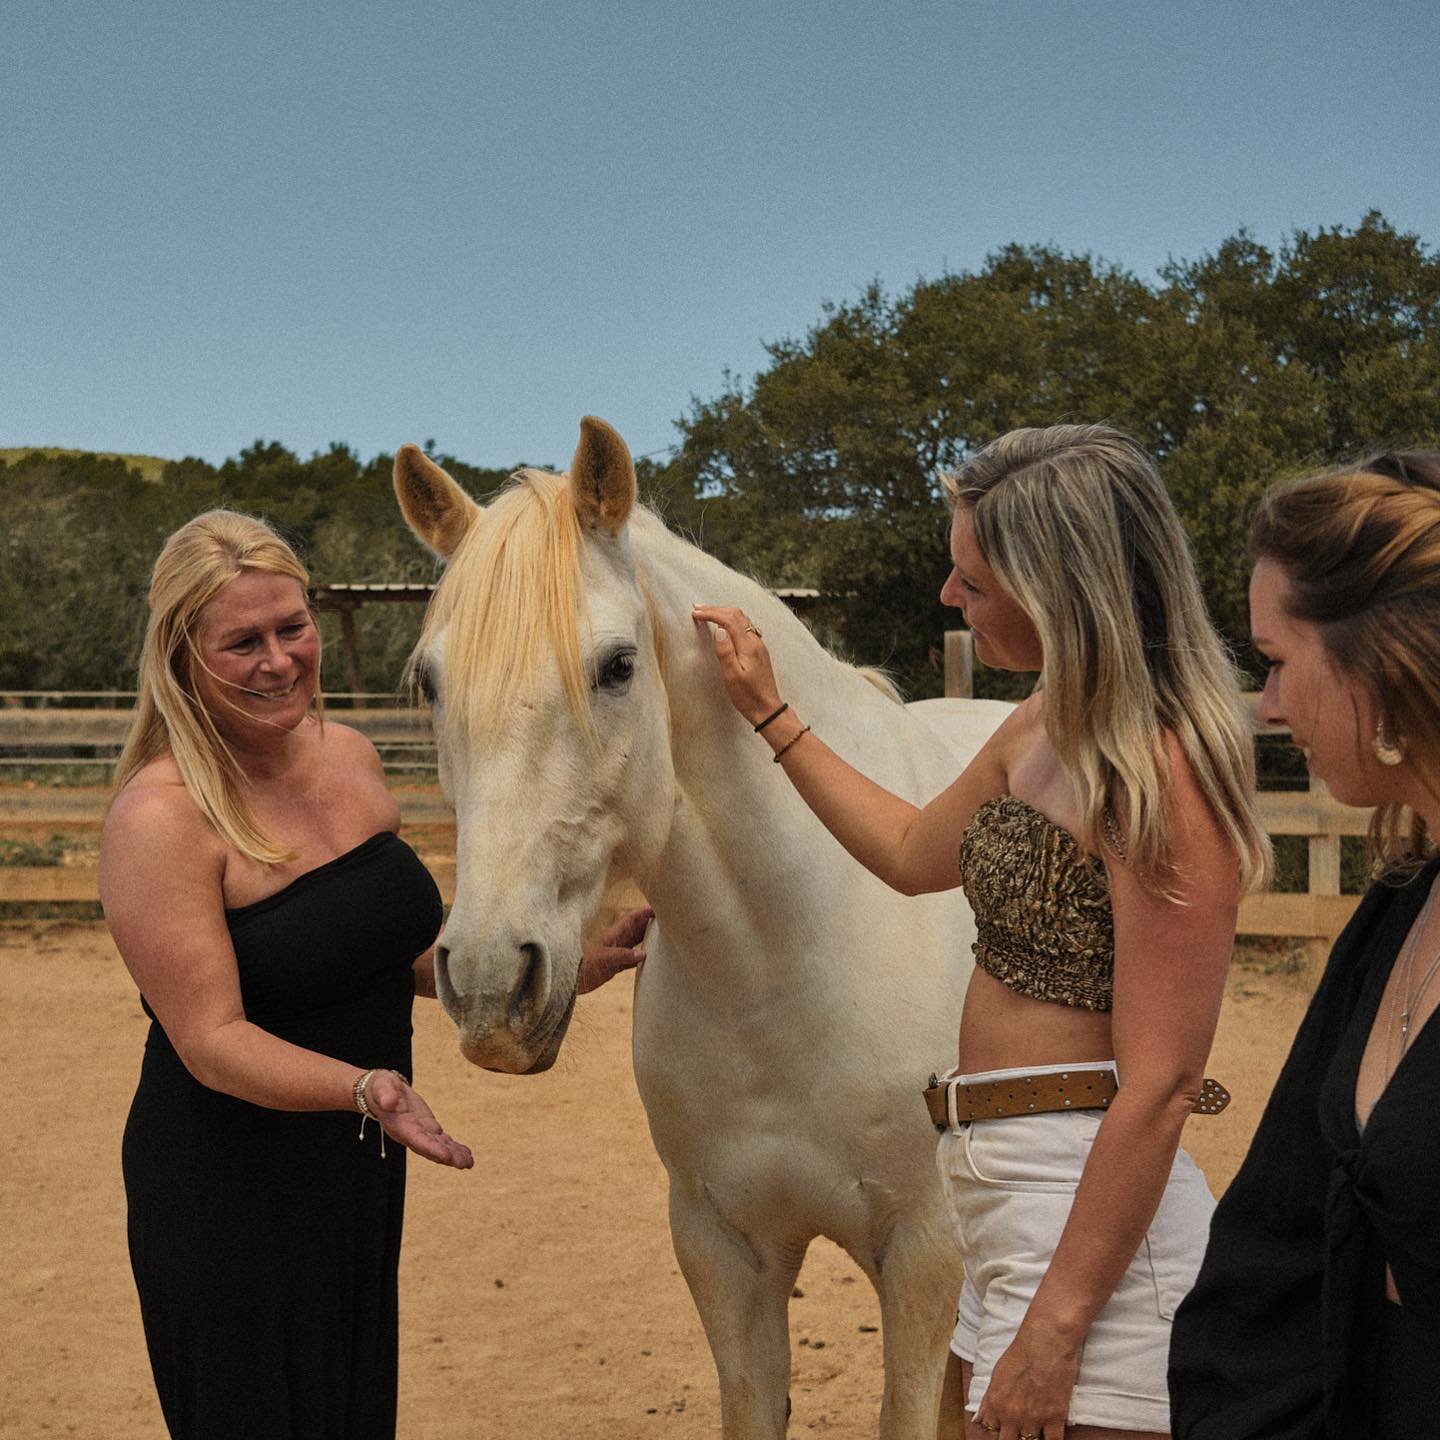 Experience a shared horse coaching session and see your loved ones in a whole new light! 💫

In a session, you&rsquo;ll engage in guided, ground-based activities with horses, who act as mirrors to our inner selves. This unique interaction reveals how